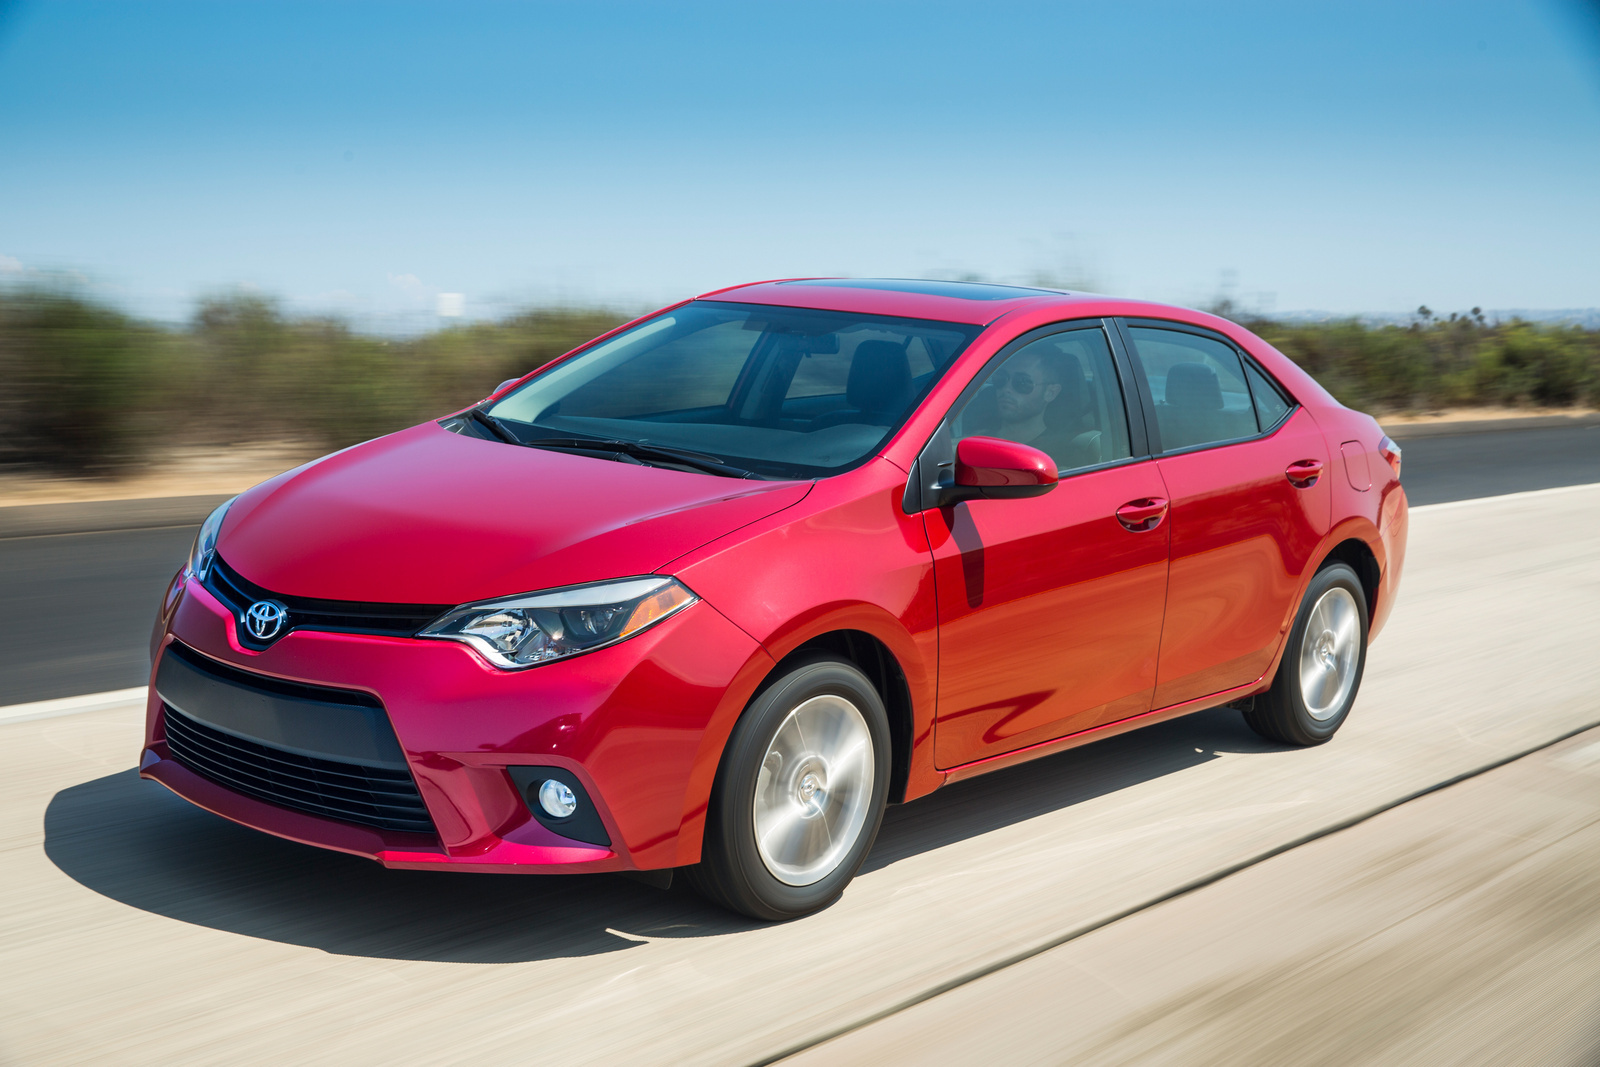 2014 Toyota Corolla S 6 Speed Manual Review - clevertesting